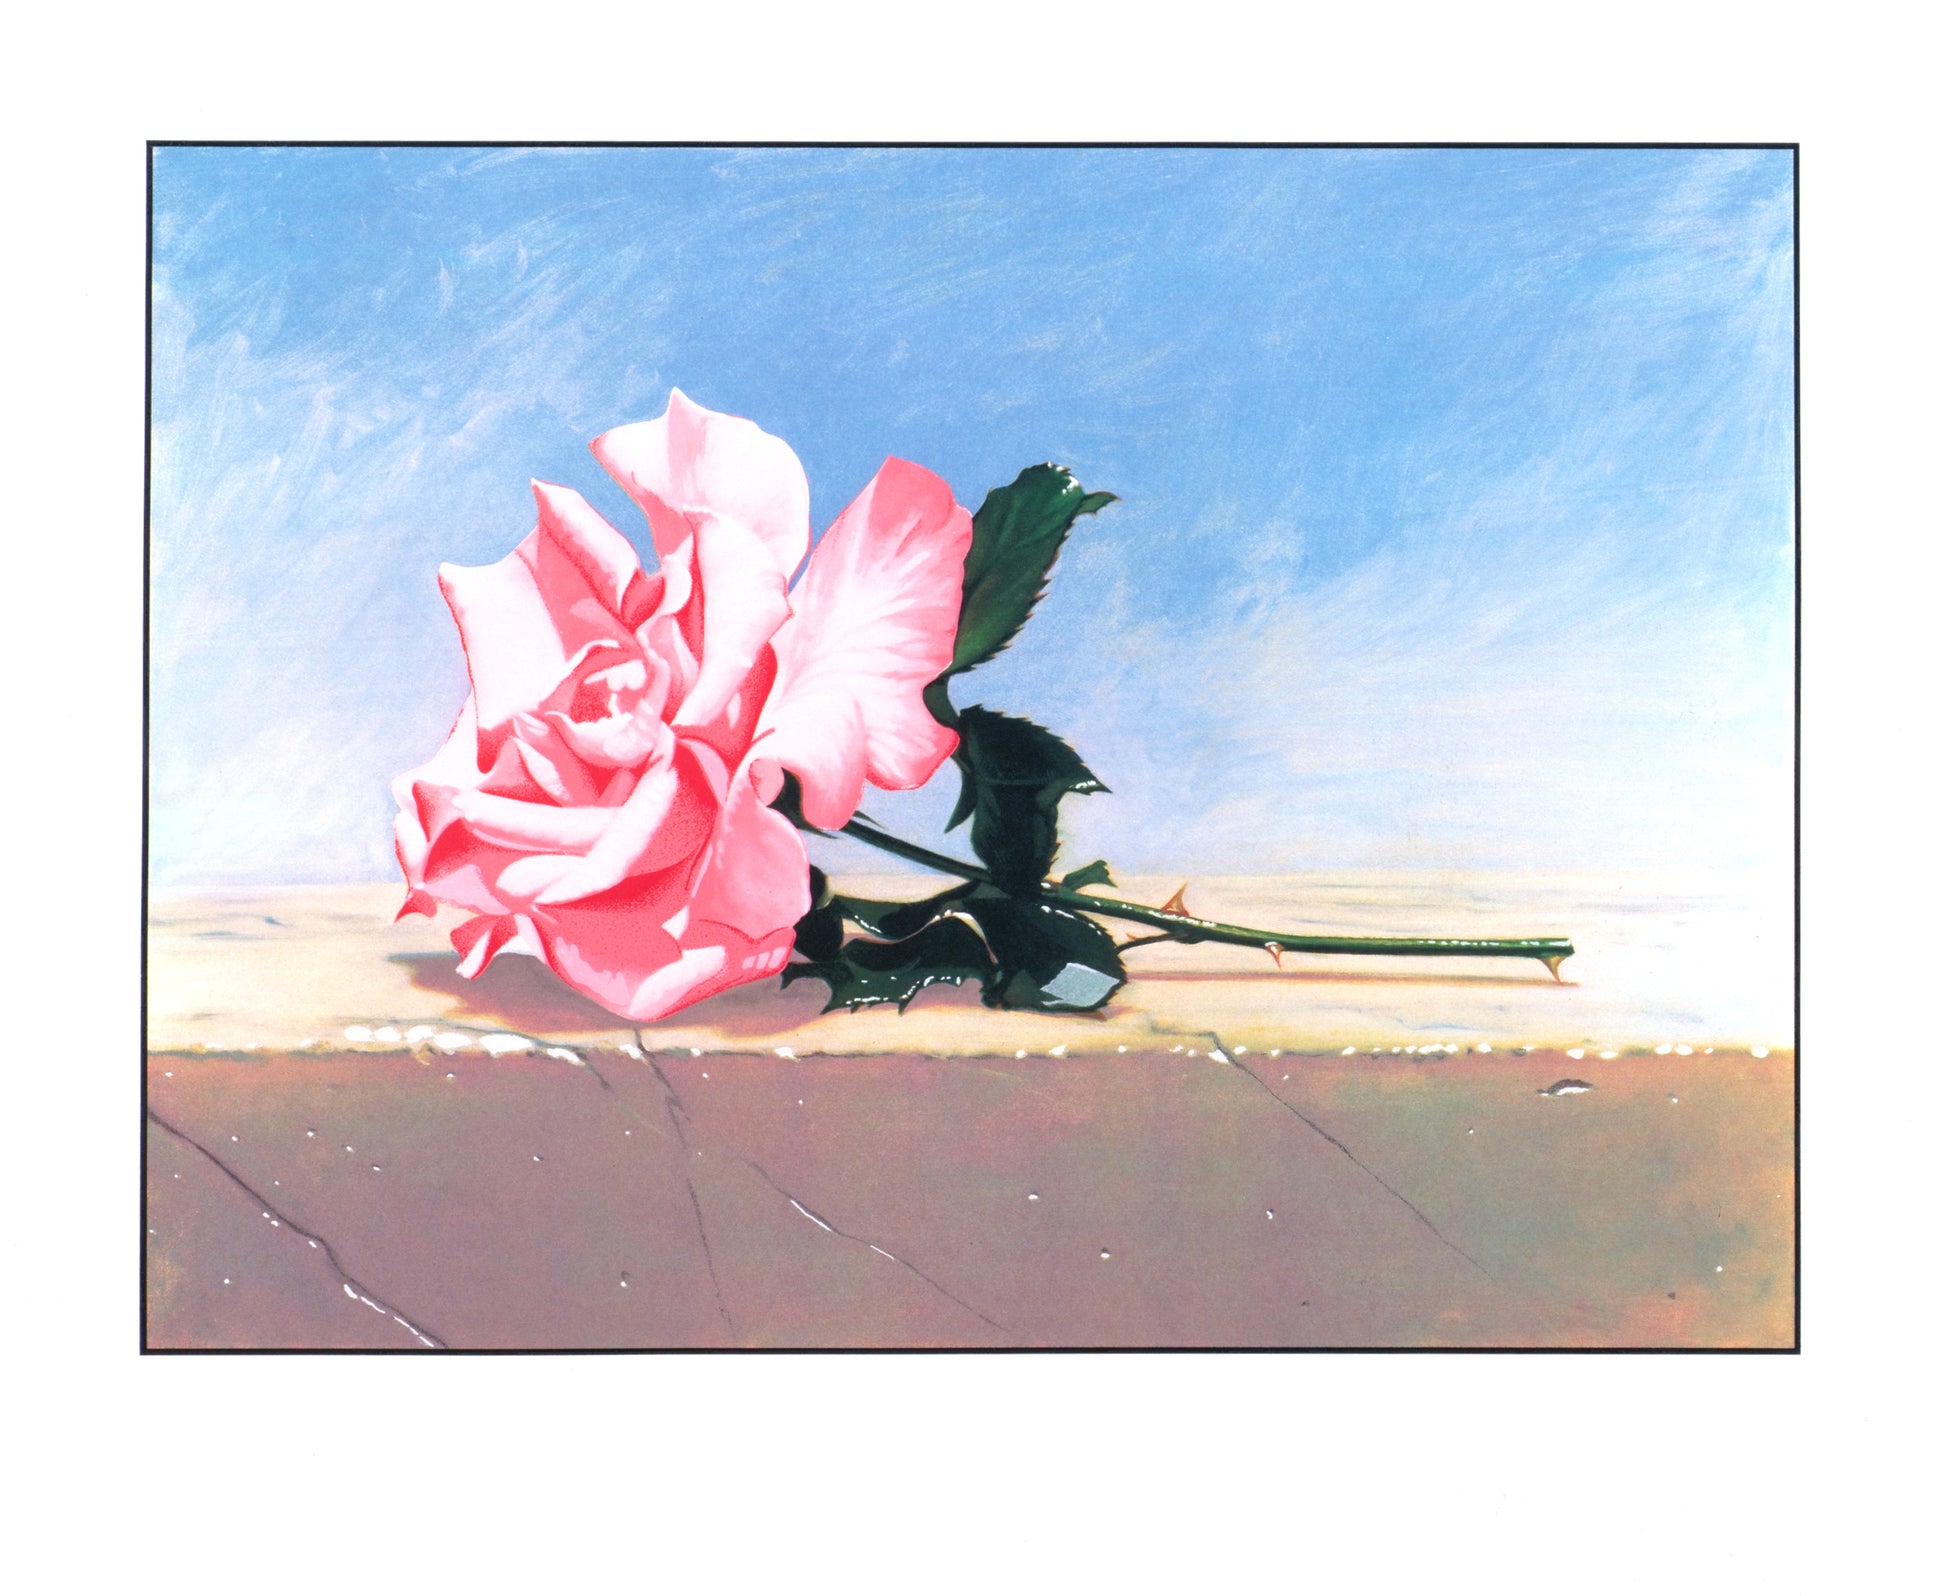 	“Andalusia Rose” by John Kelley, Realistic painting of a single pink rose with green leaves, lying on a ledge against a backdrop of a clear blue sky.